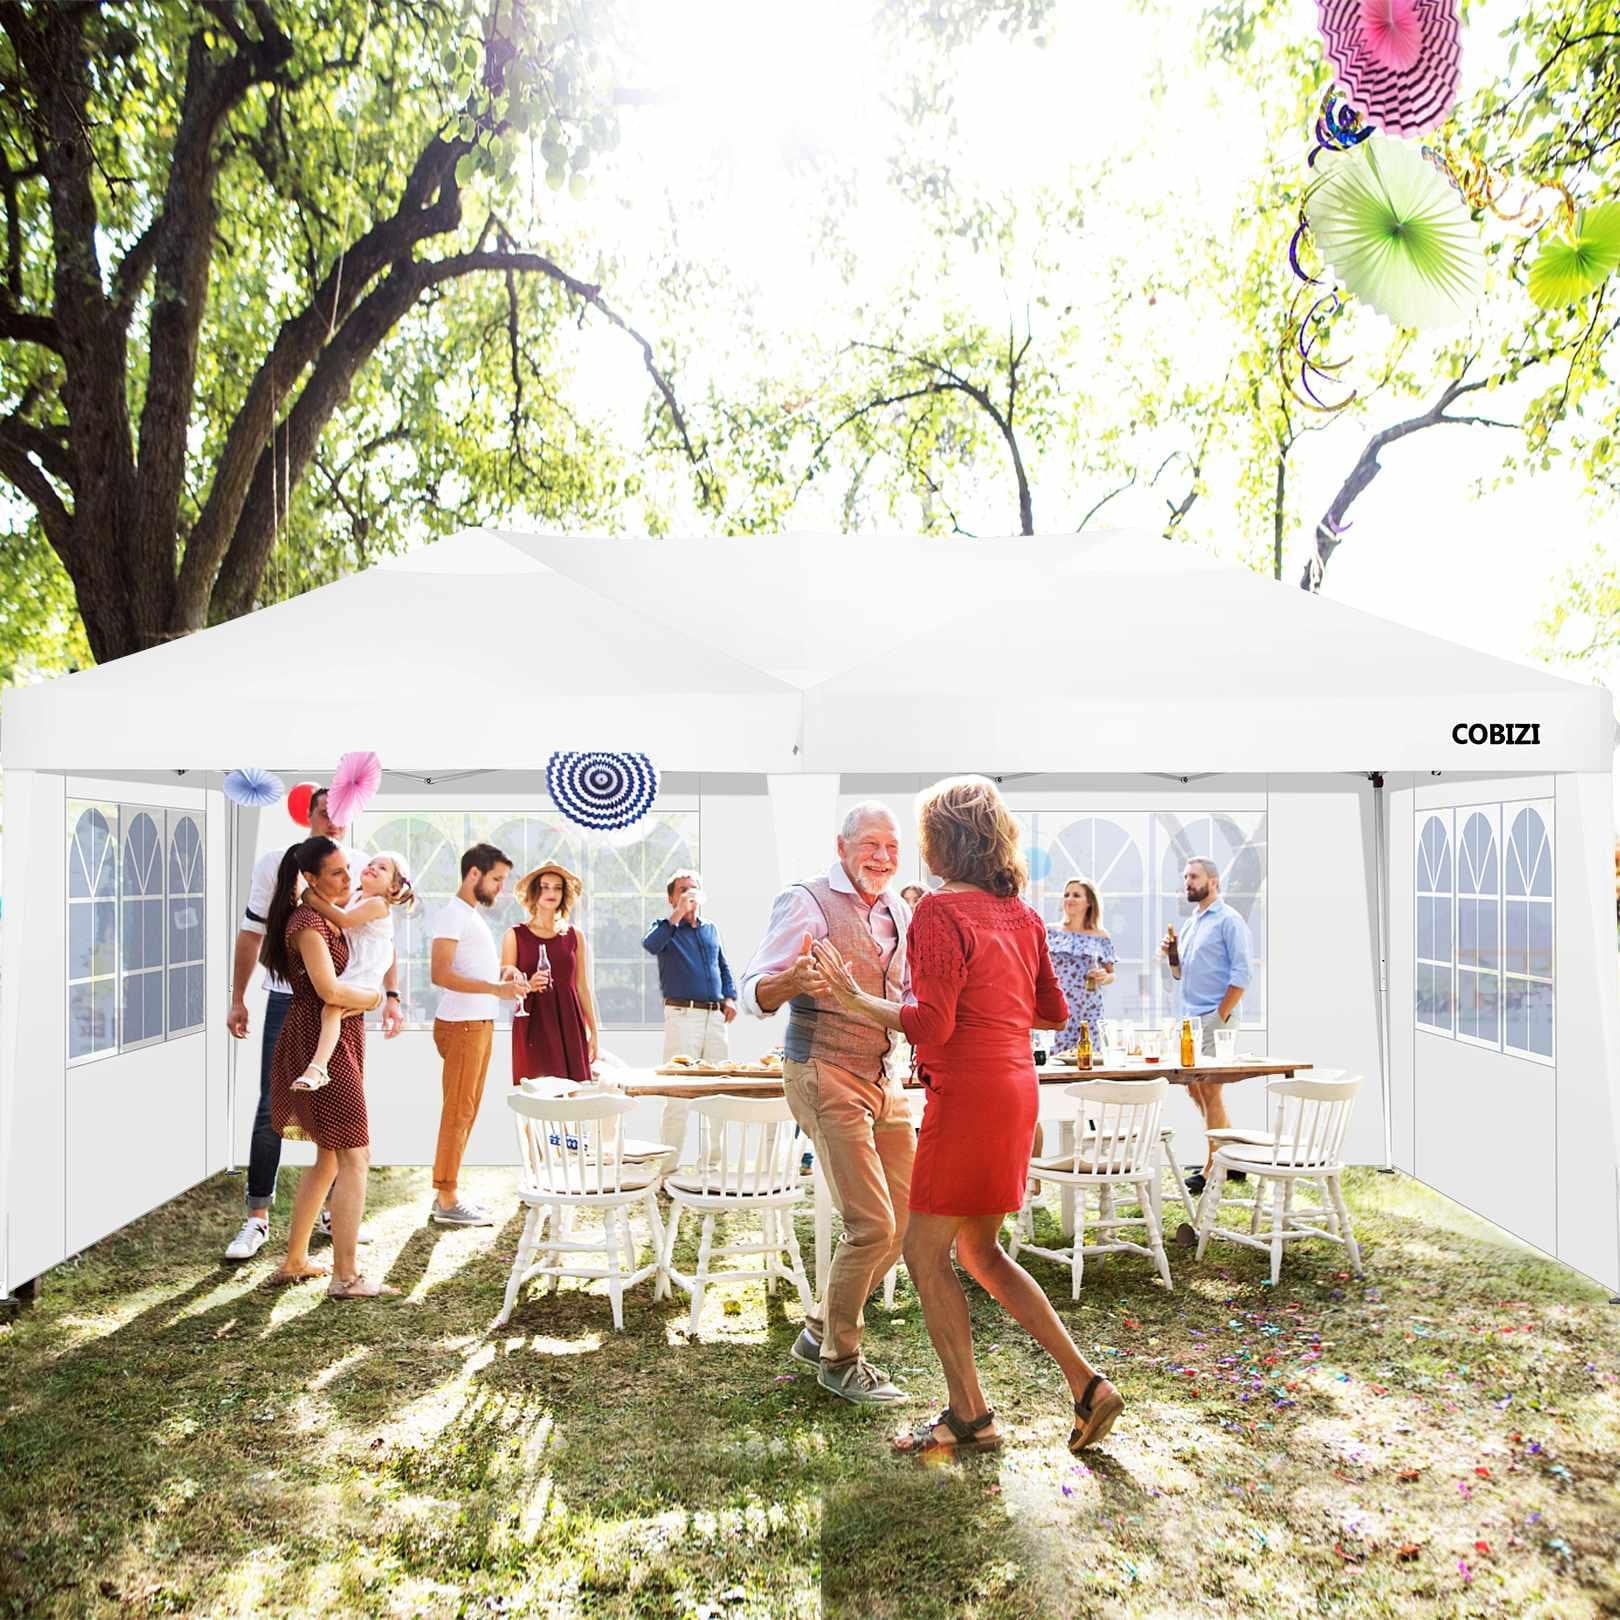 10 x 20ft Pop Up Canopy Tent Instant Outdoor Party Canopy Straight Leg Commercial Gazebo Tent Shelter with 6 Removable Sidewalls and Carrying Bag, White